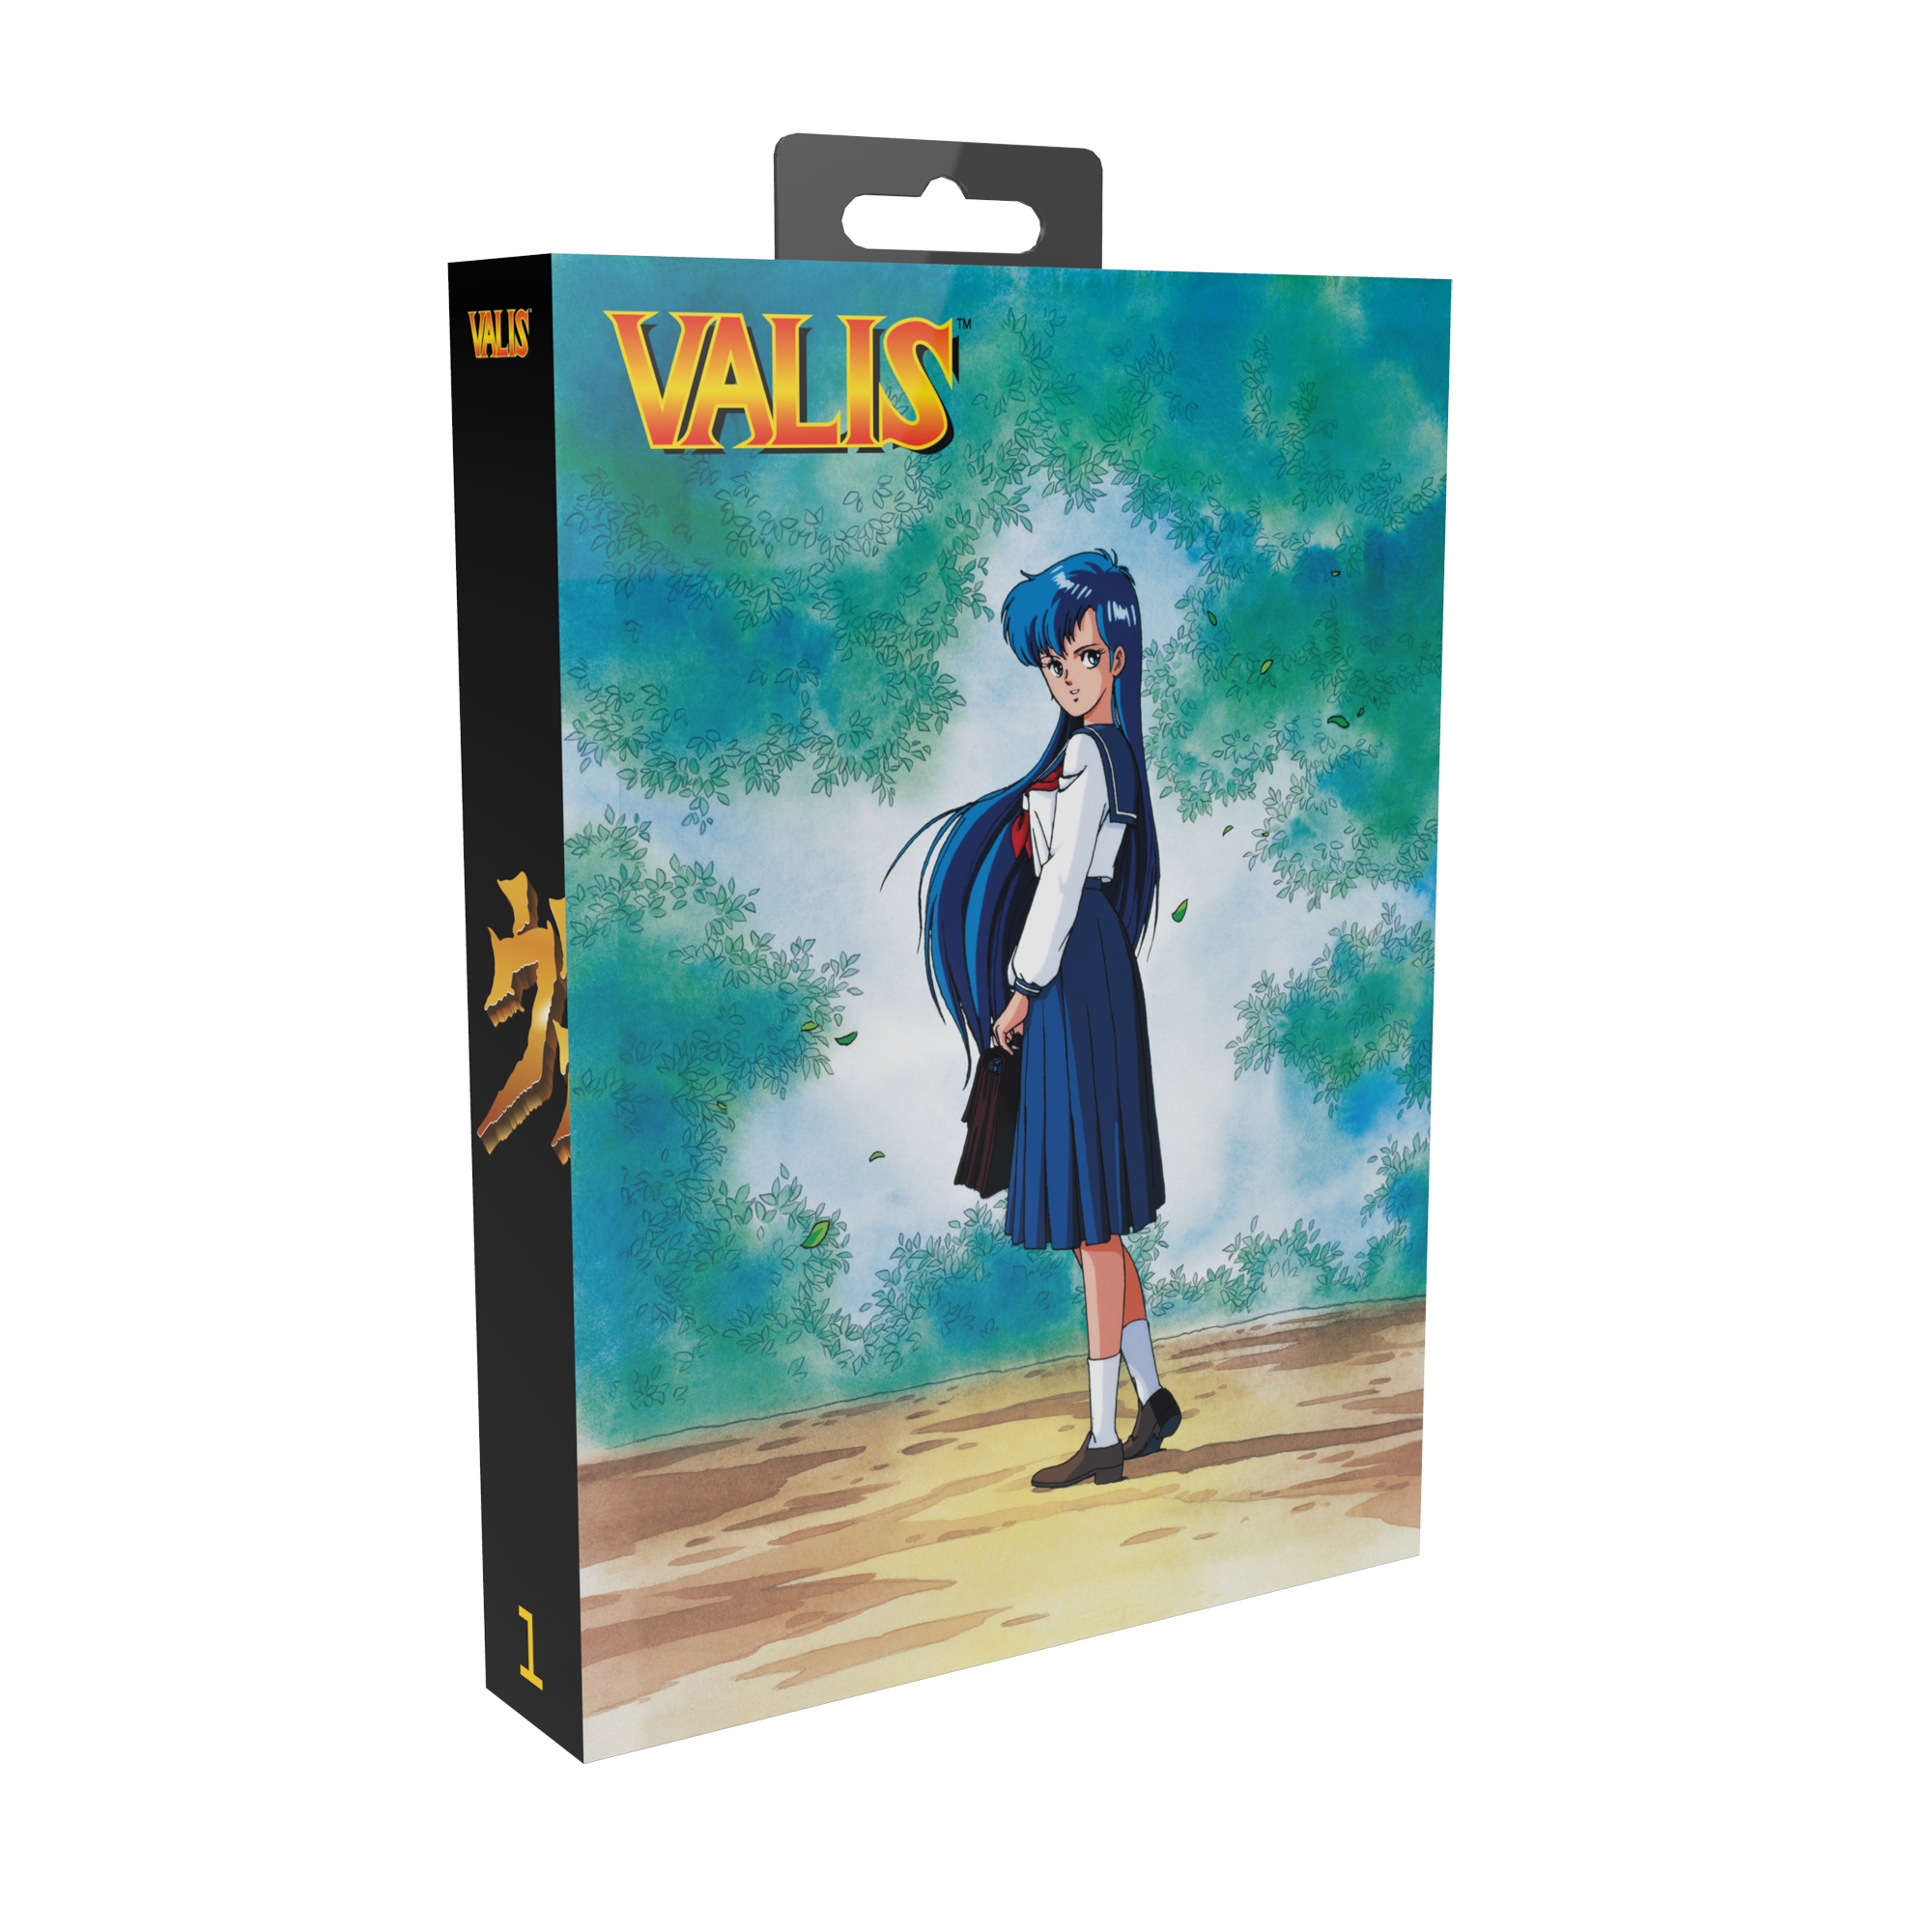 ValisCollectionPressKit Valis TFS Slipcover 01.png